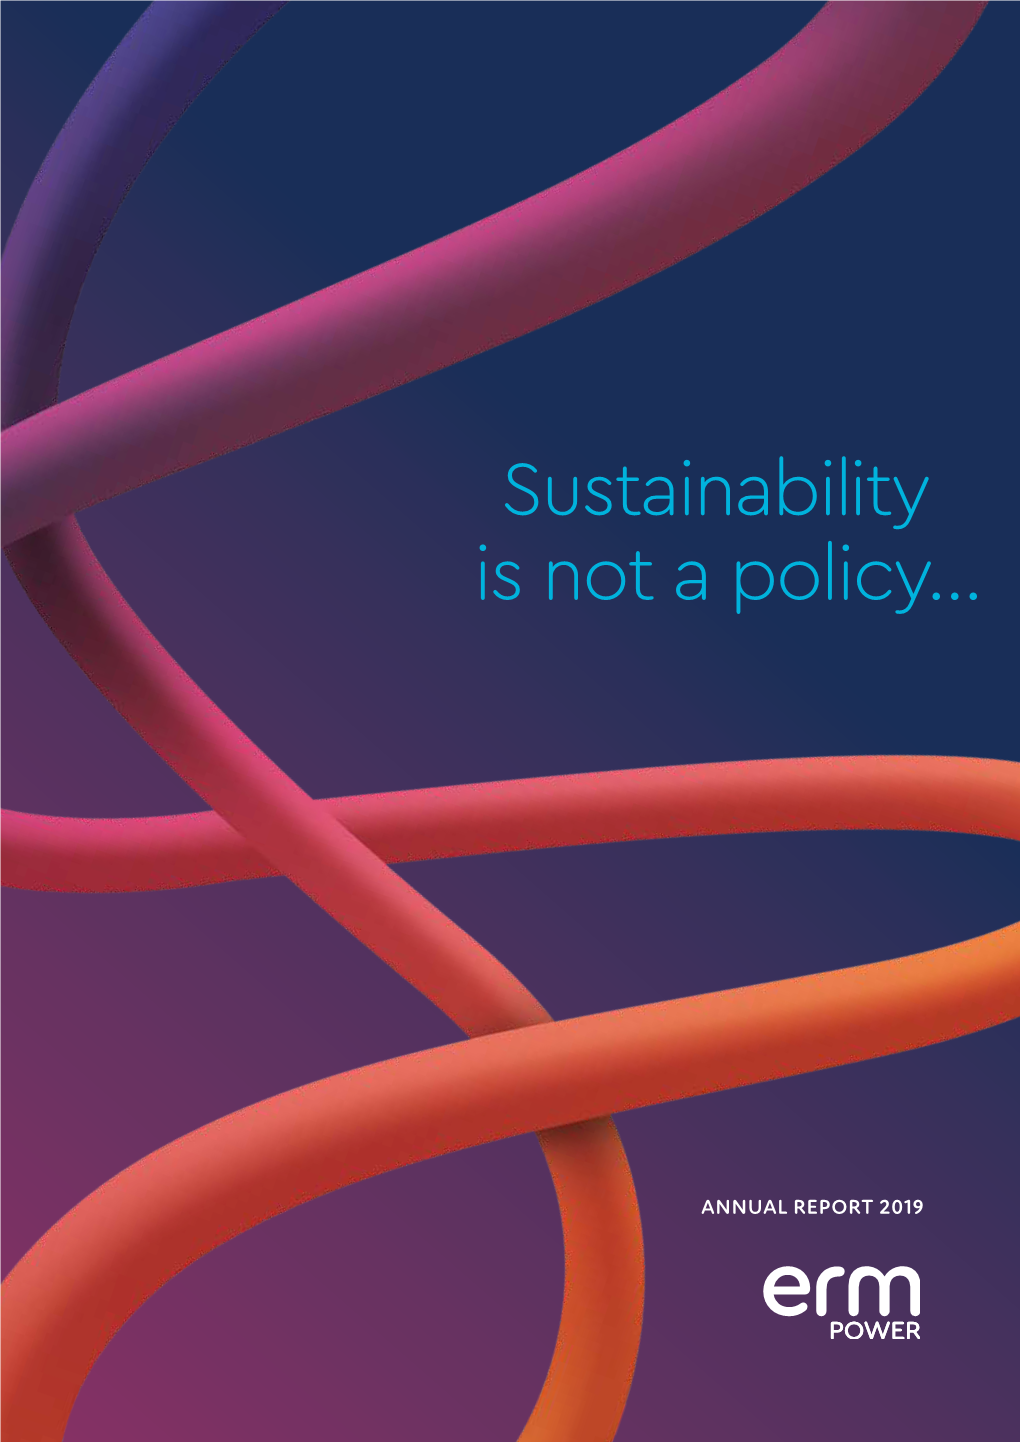 Sustainability Is Not a Policy... ERM POWER ANNUAL REPORT 2019